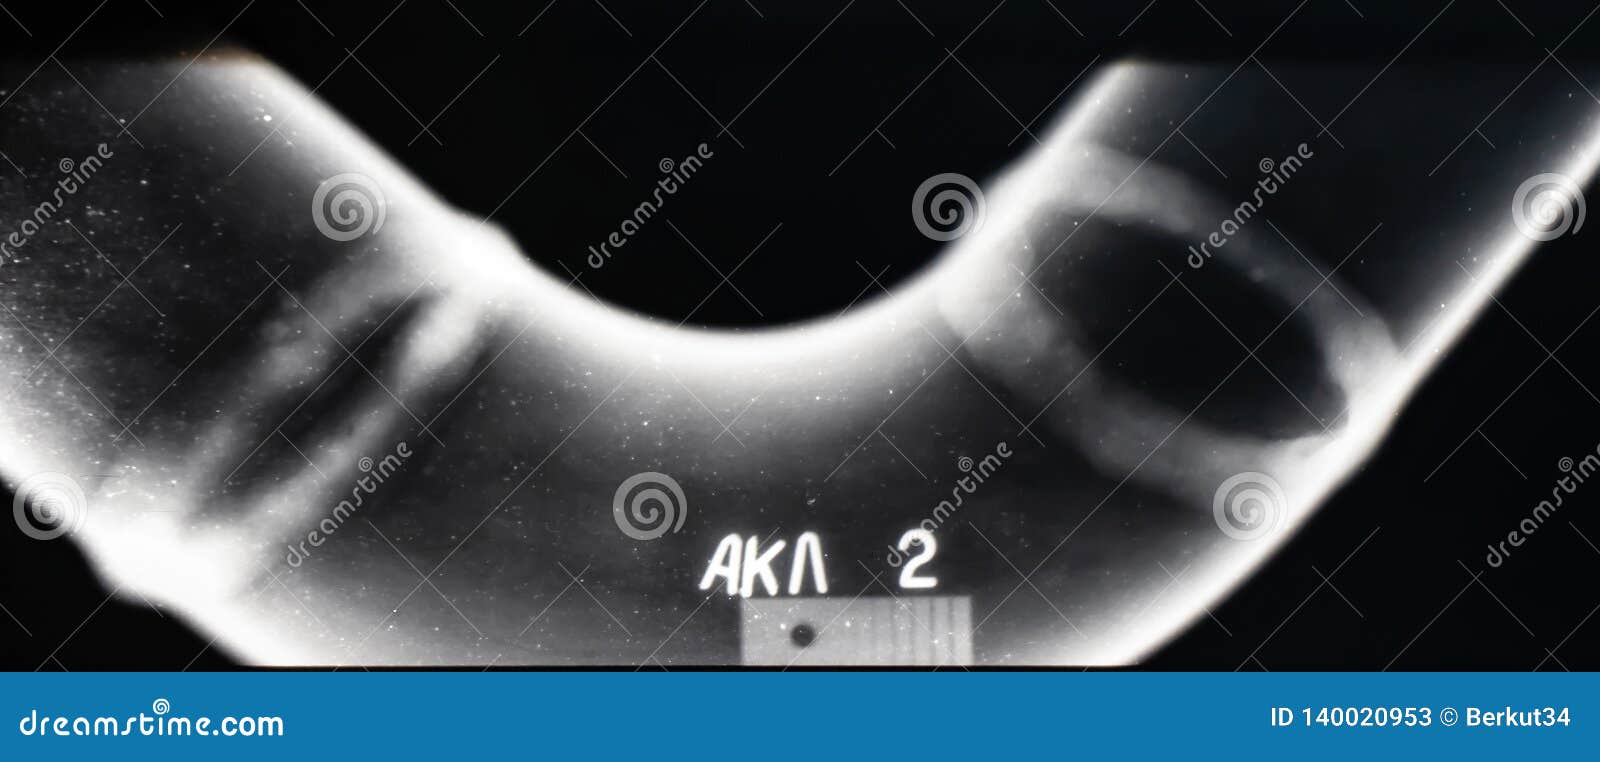 X-ray of a Welded Seam of the Pipeline Stock Image - Image of deficiency,  pipeline: 140020953